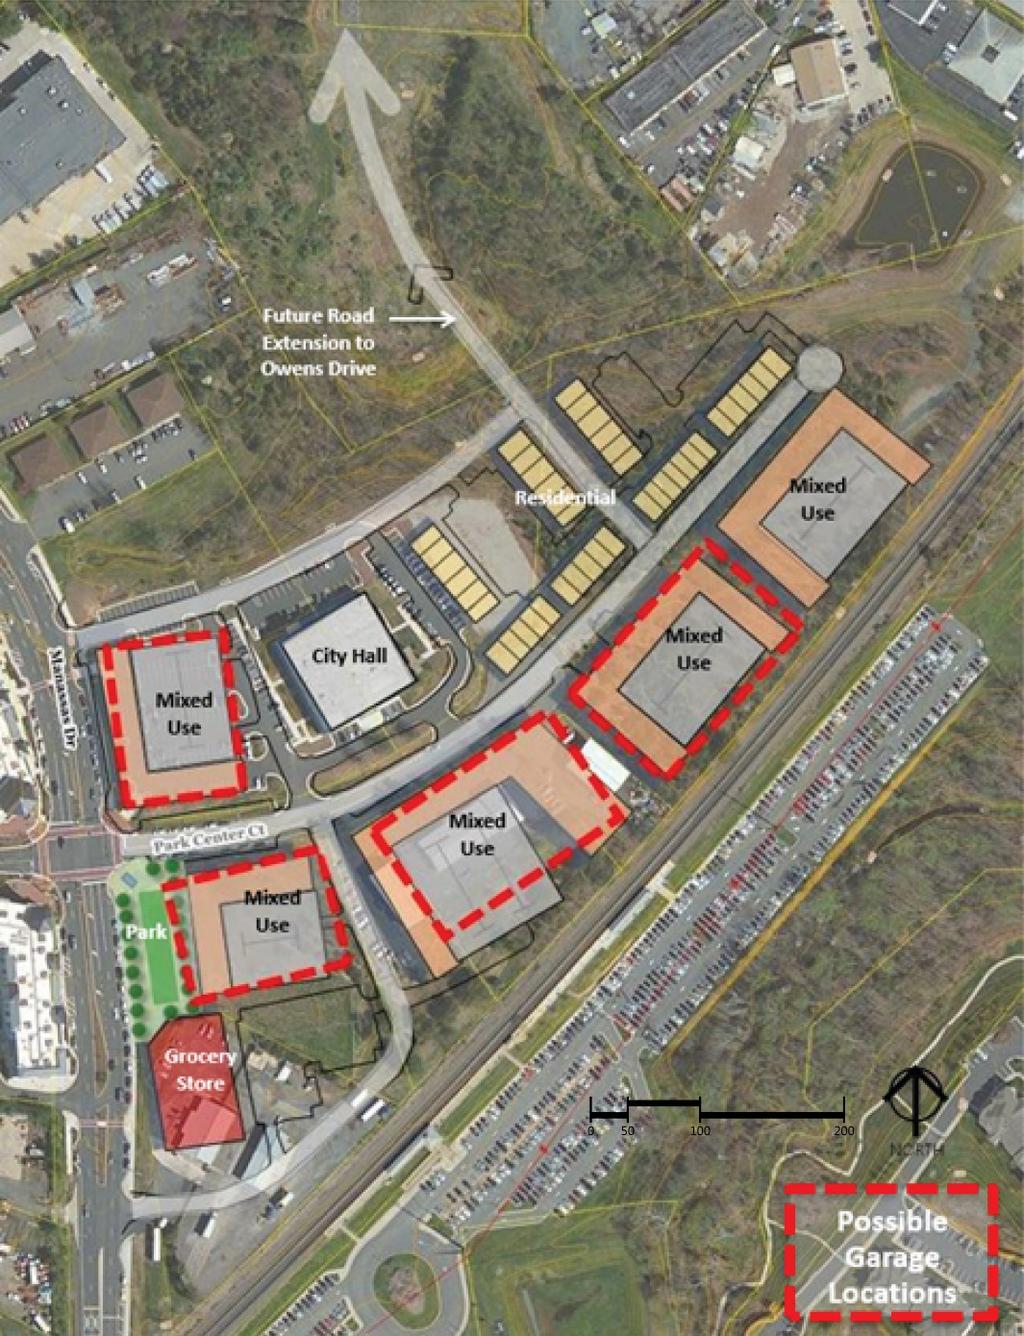 VRE Parking Expansion within the City Center Context To help understand how a parking garage might work as part of the larger City Center development, an overall concept was developed showing each